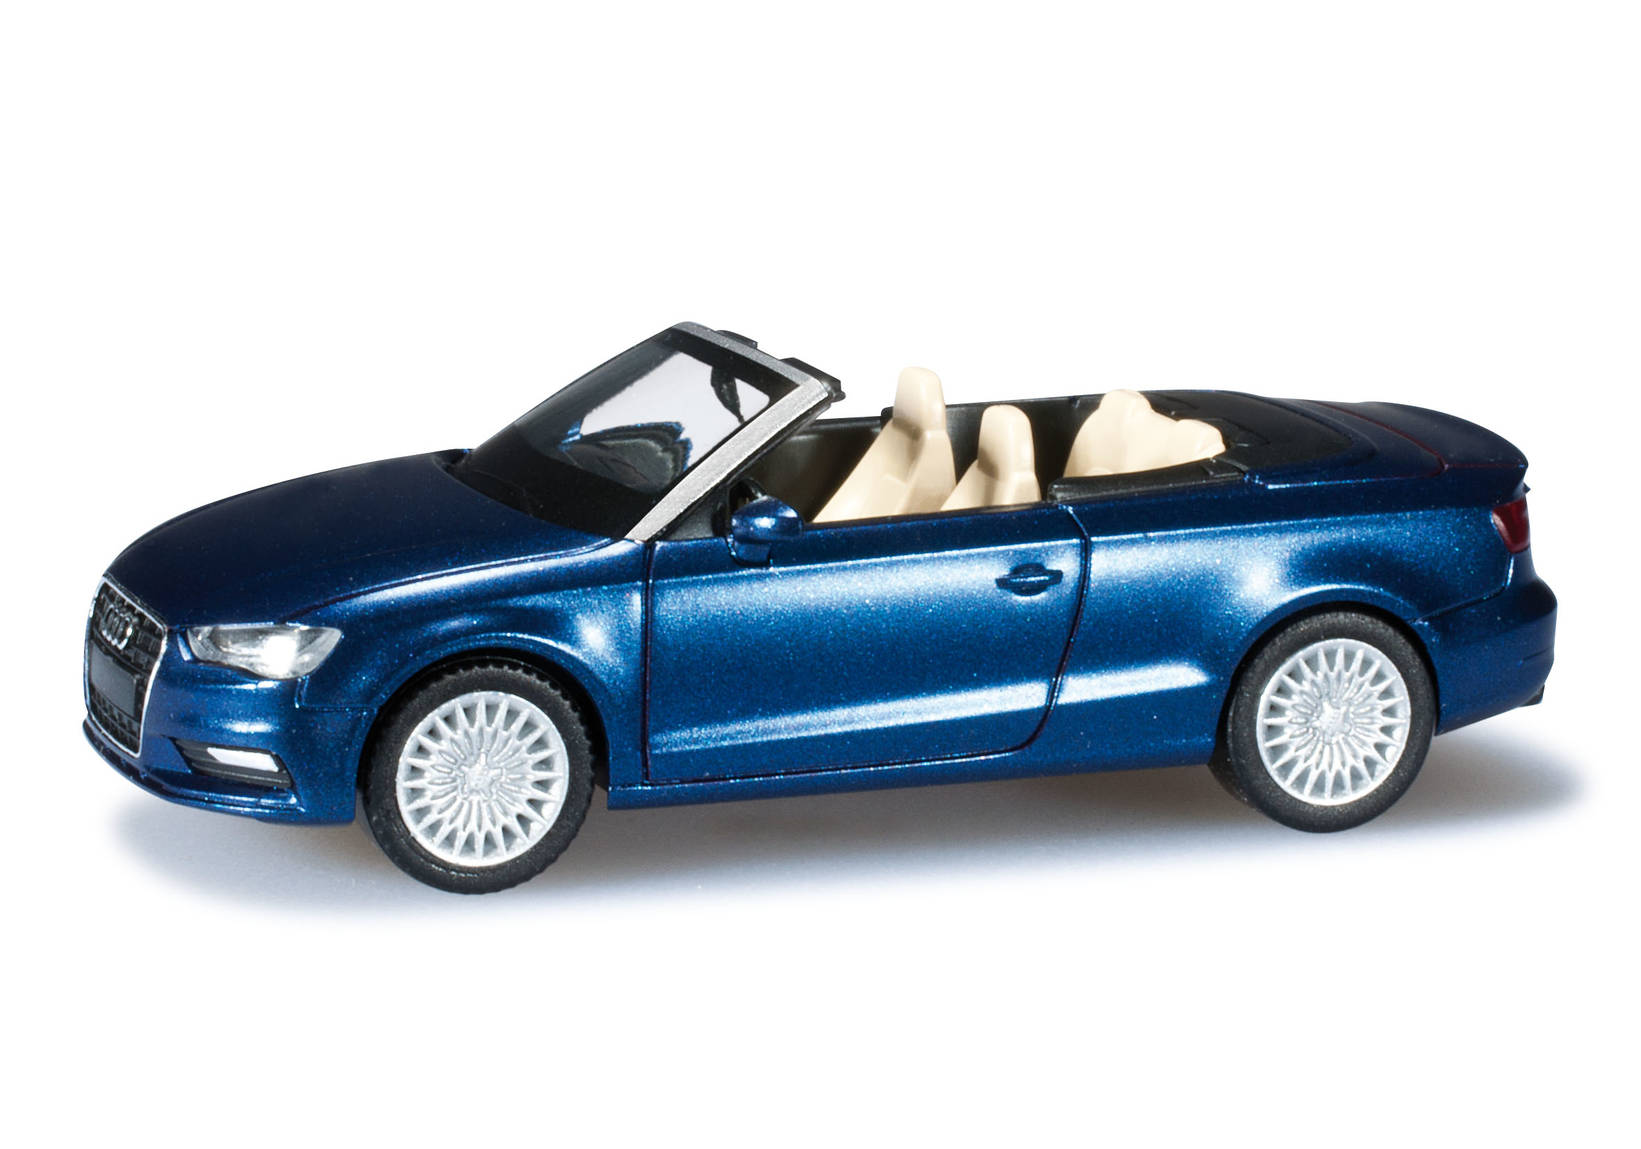 Audi A3 convertible, scuba-blue with pearl effect